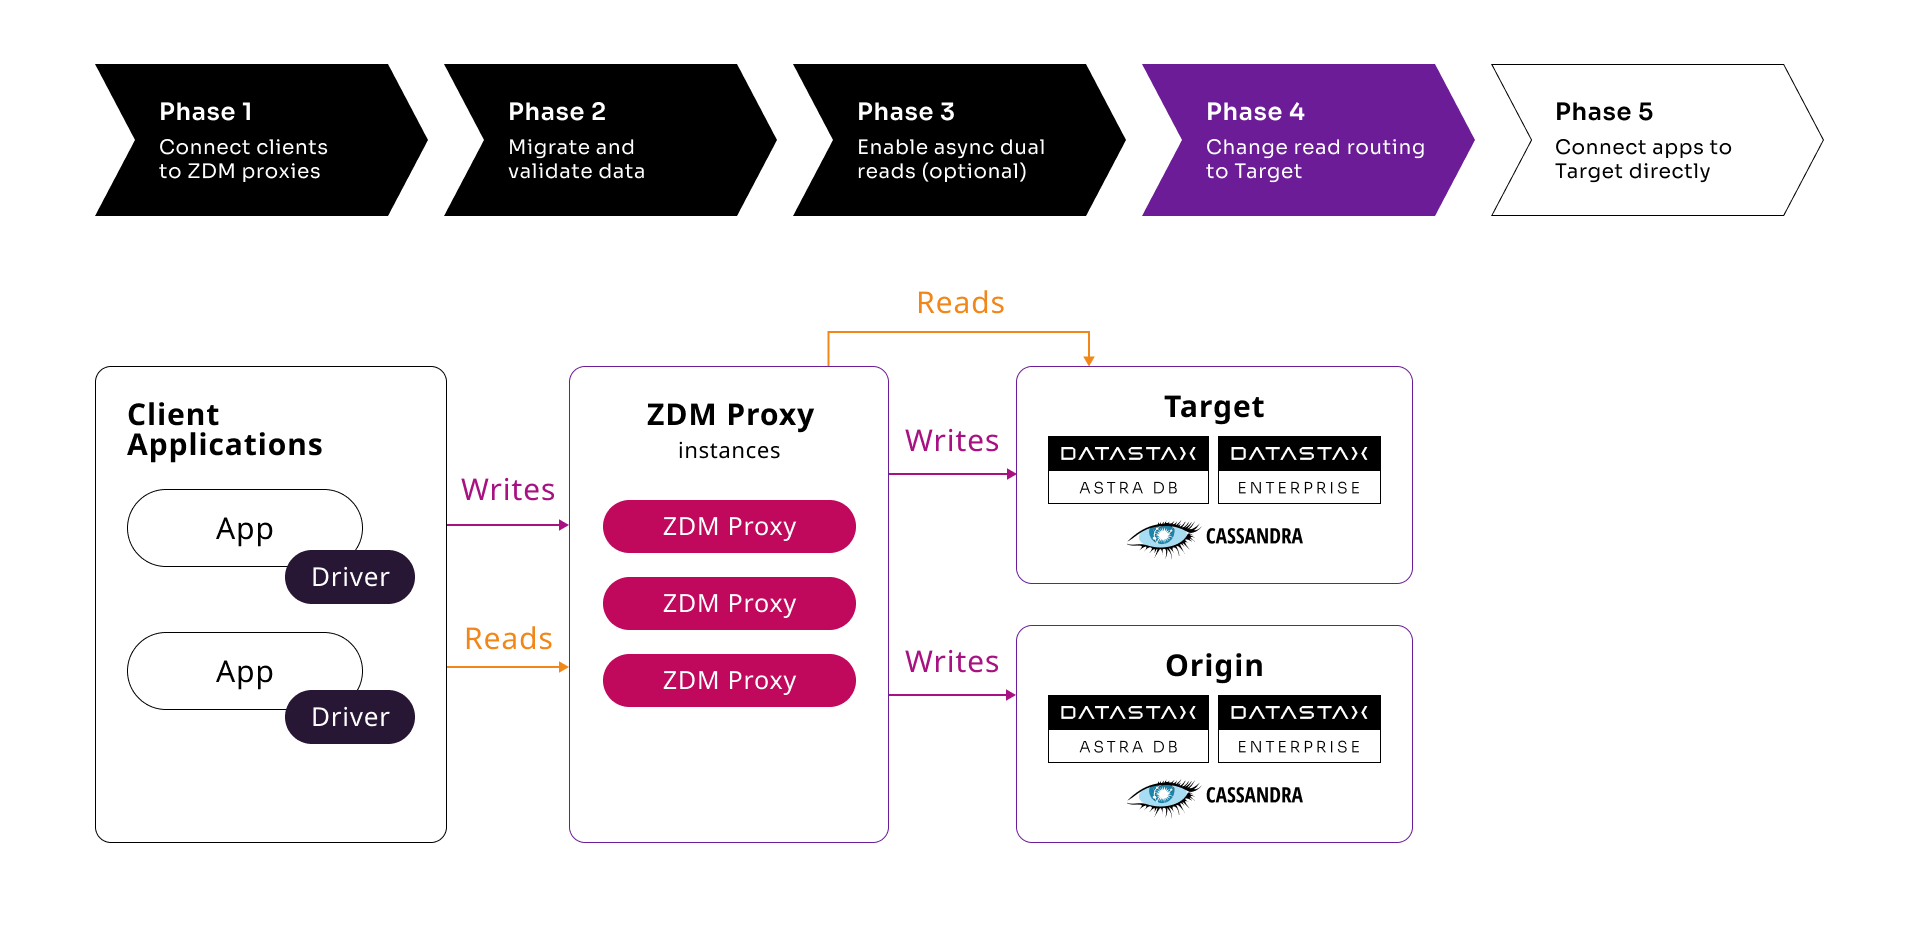 Phase 4 diagram shows read routing on ZDM Proxy was switched to Target.